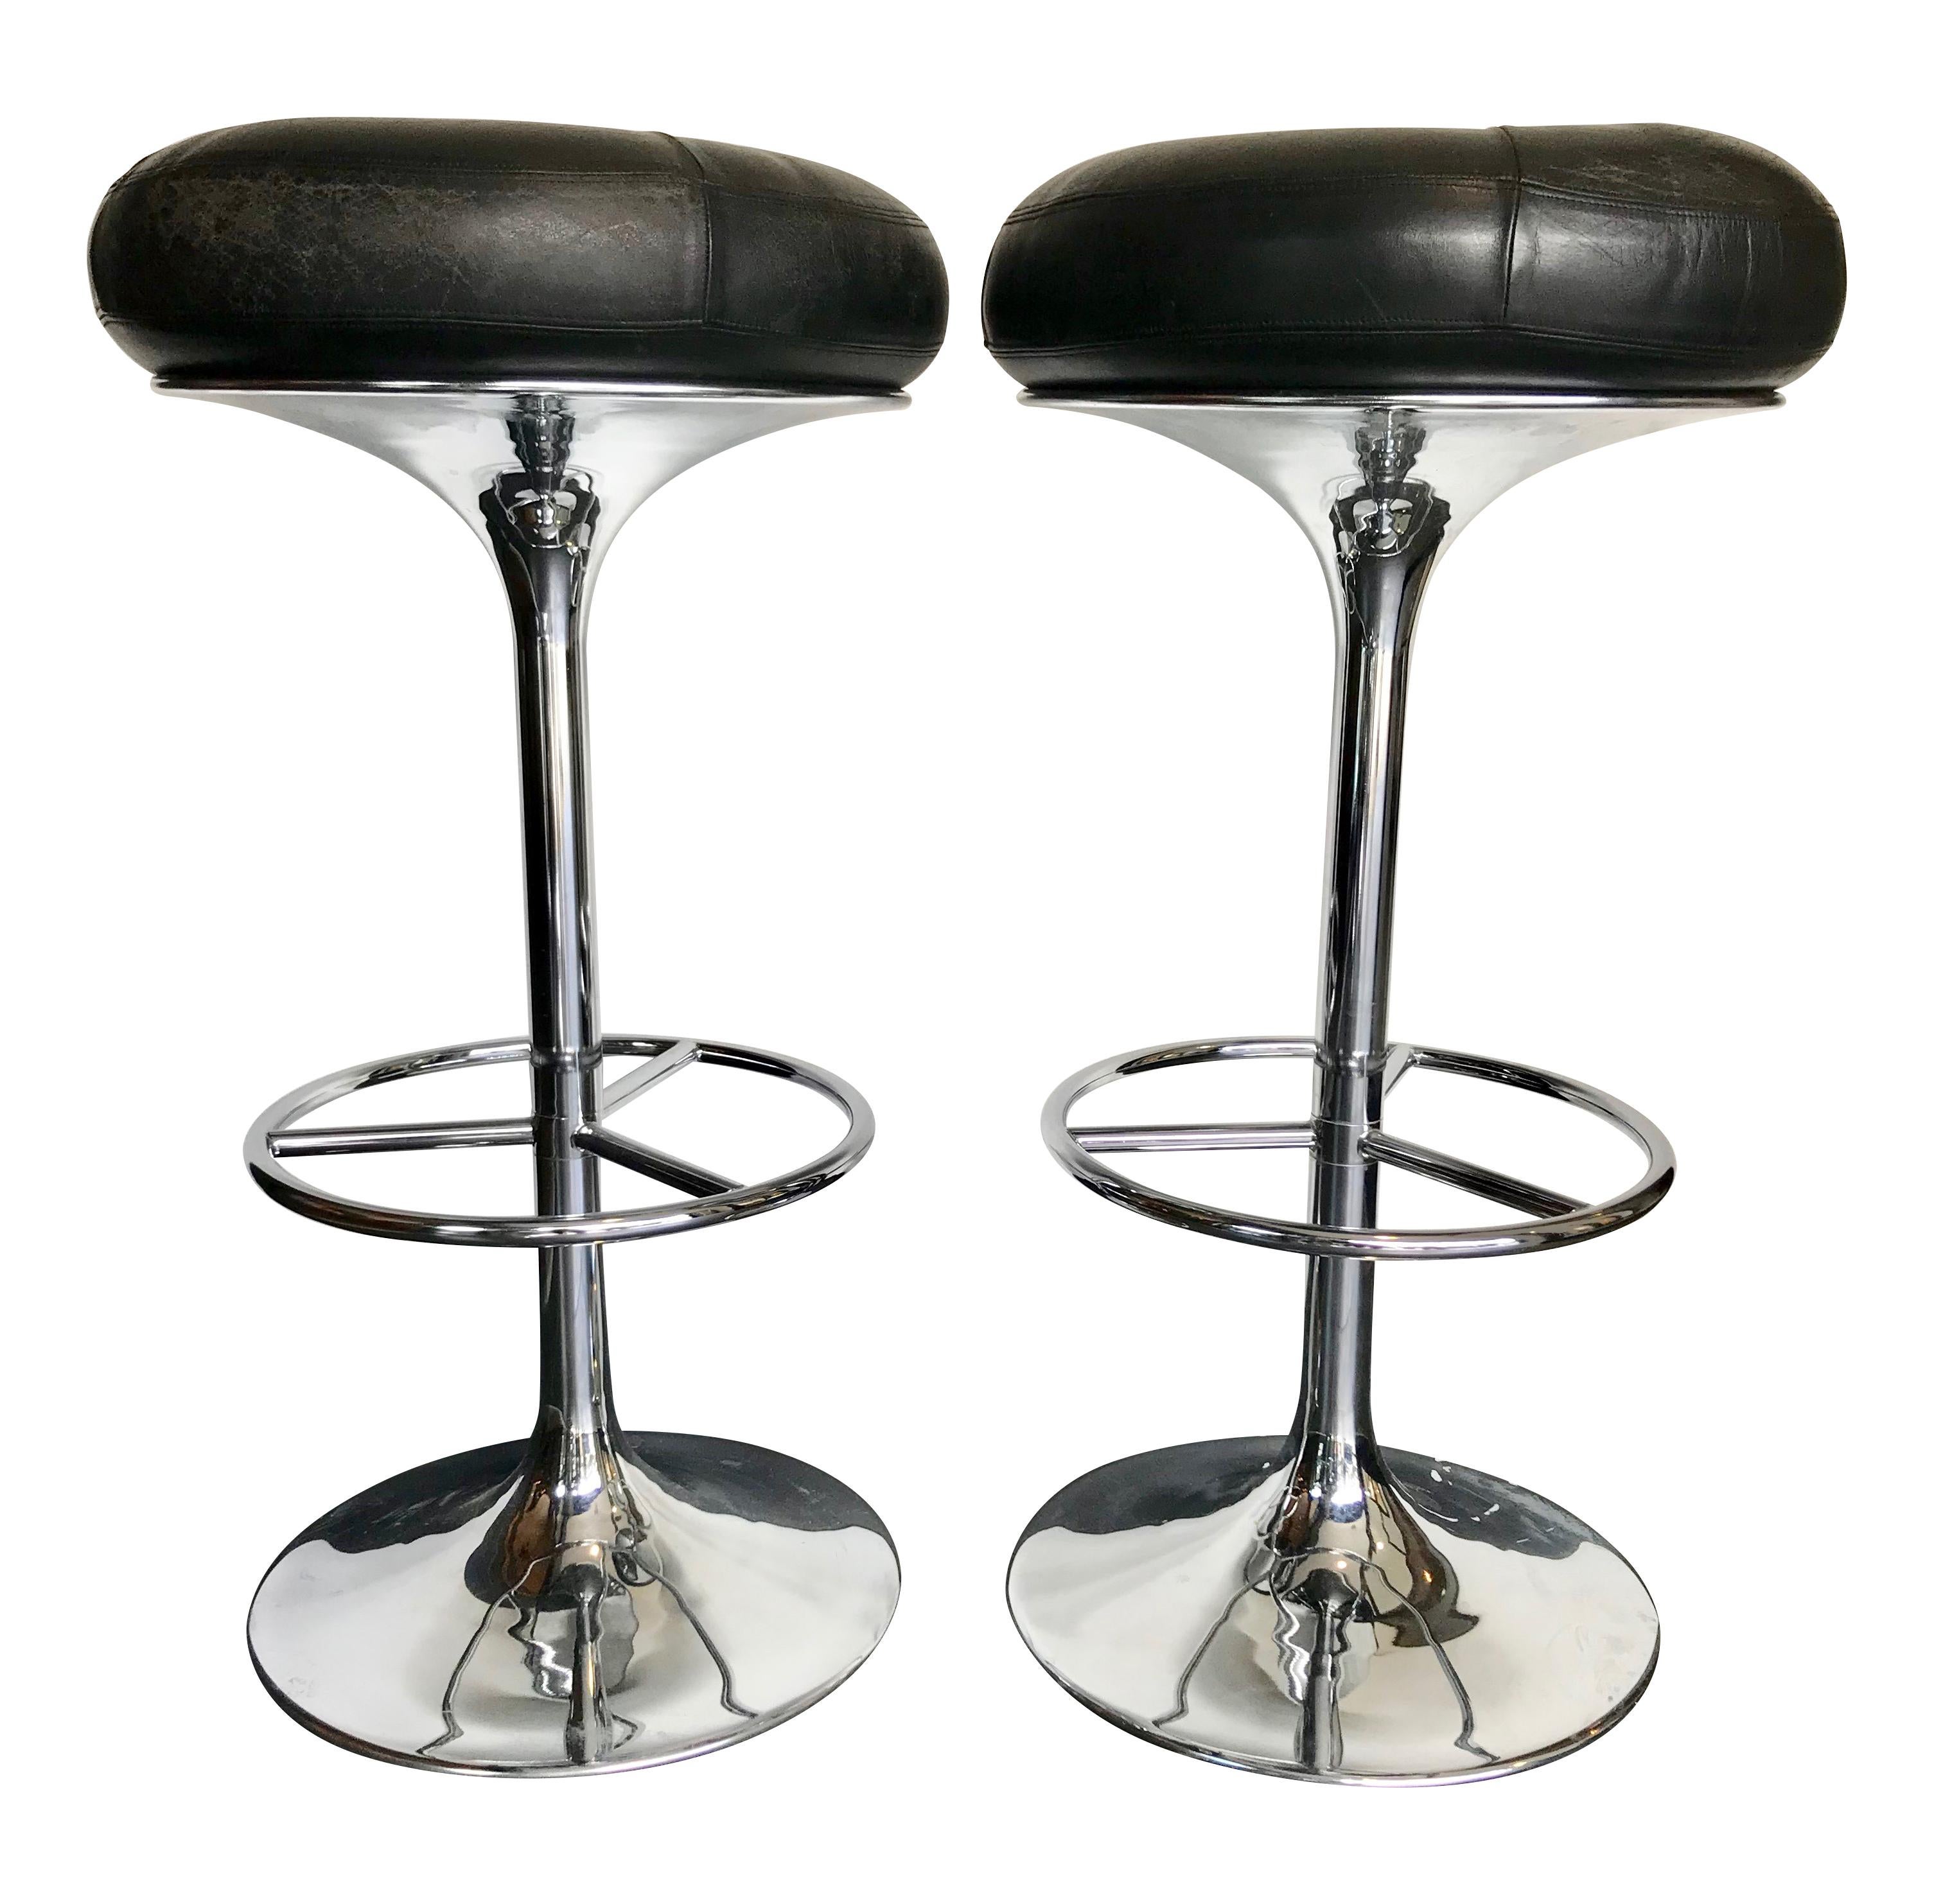 Late 20th Century Set of 4 1970s Chrome and Black Leather Bar Stools by Johanson Design, Sweden